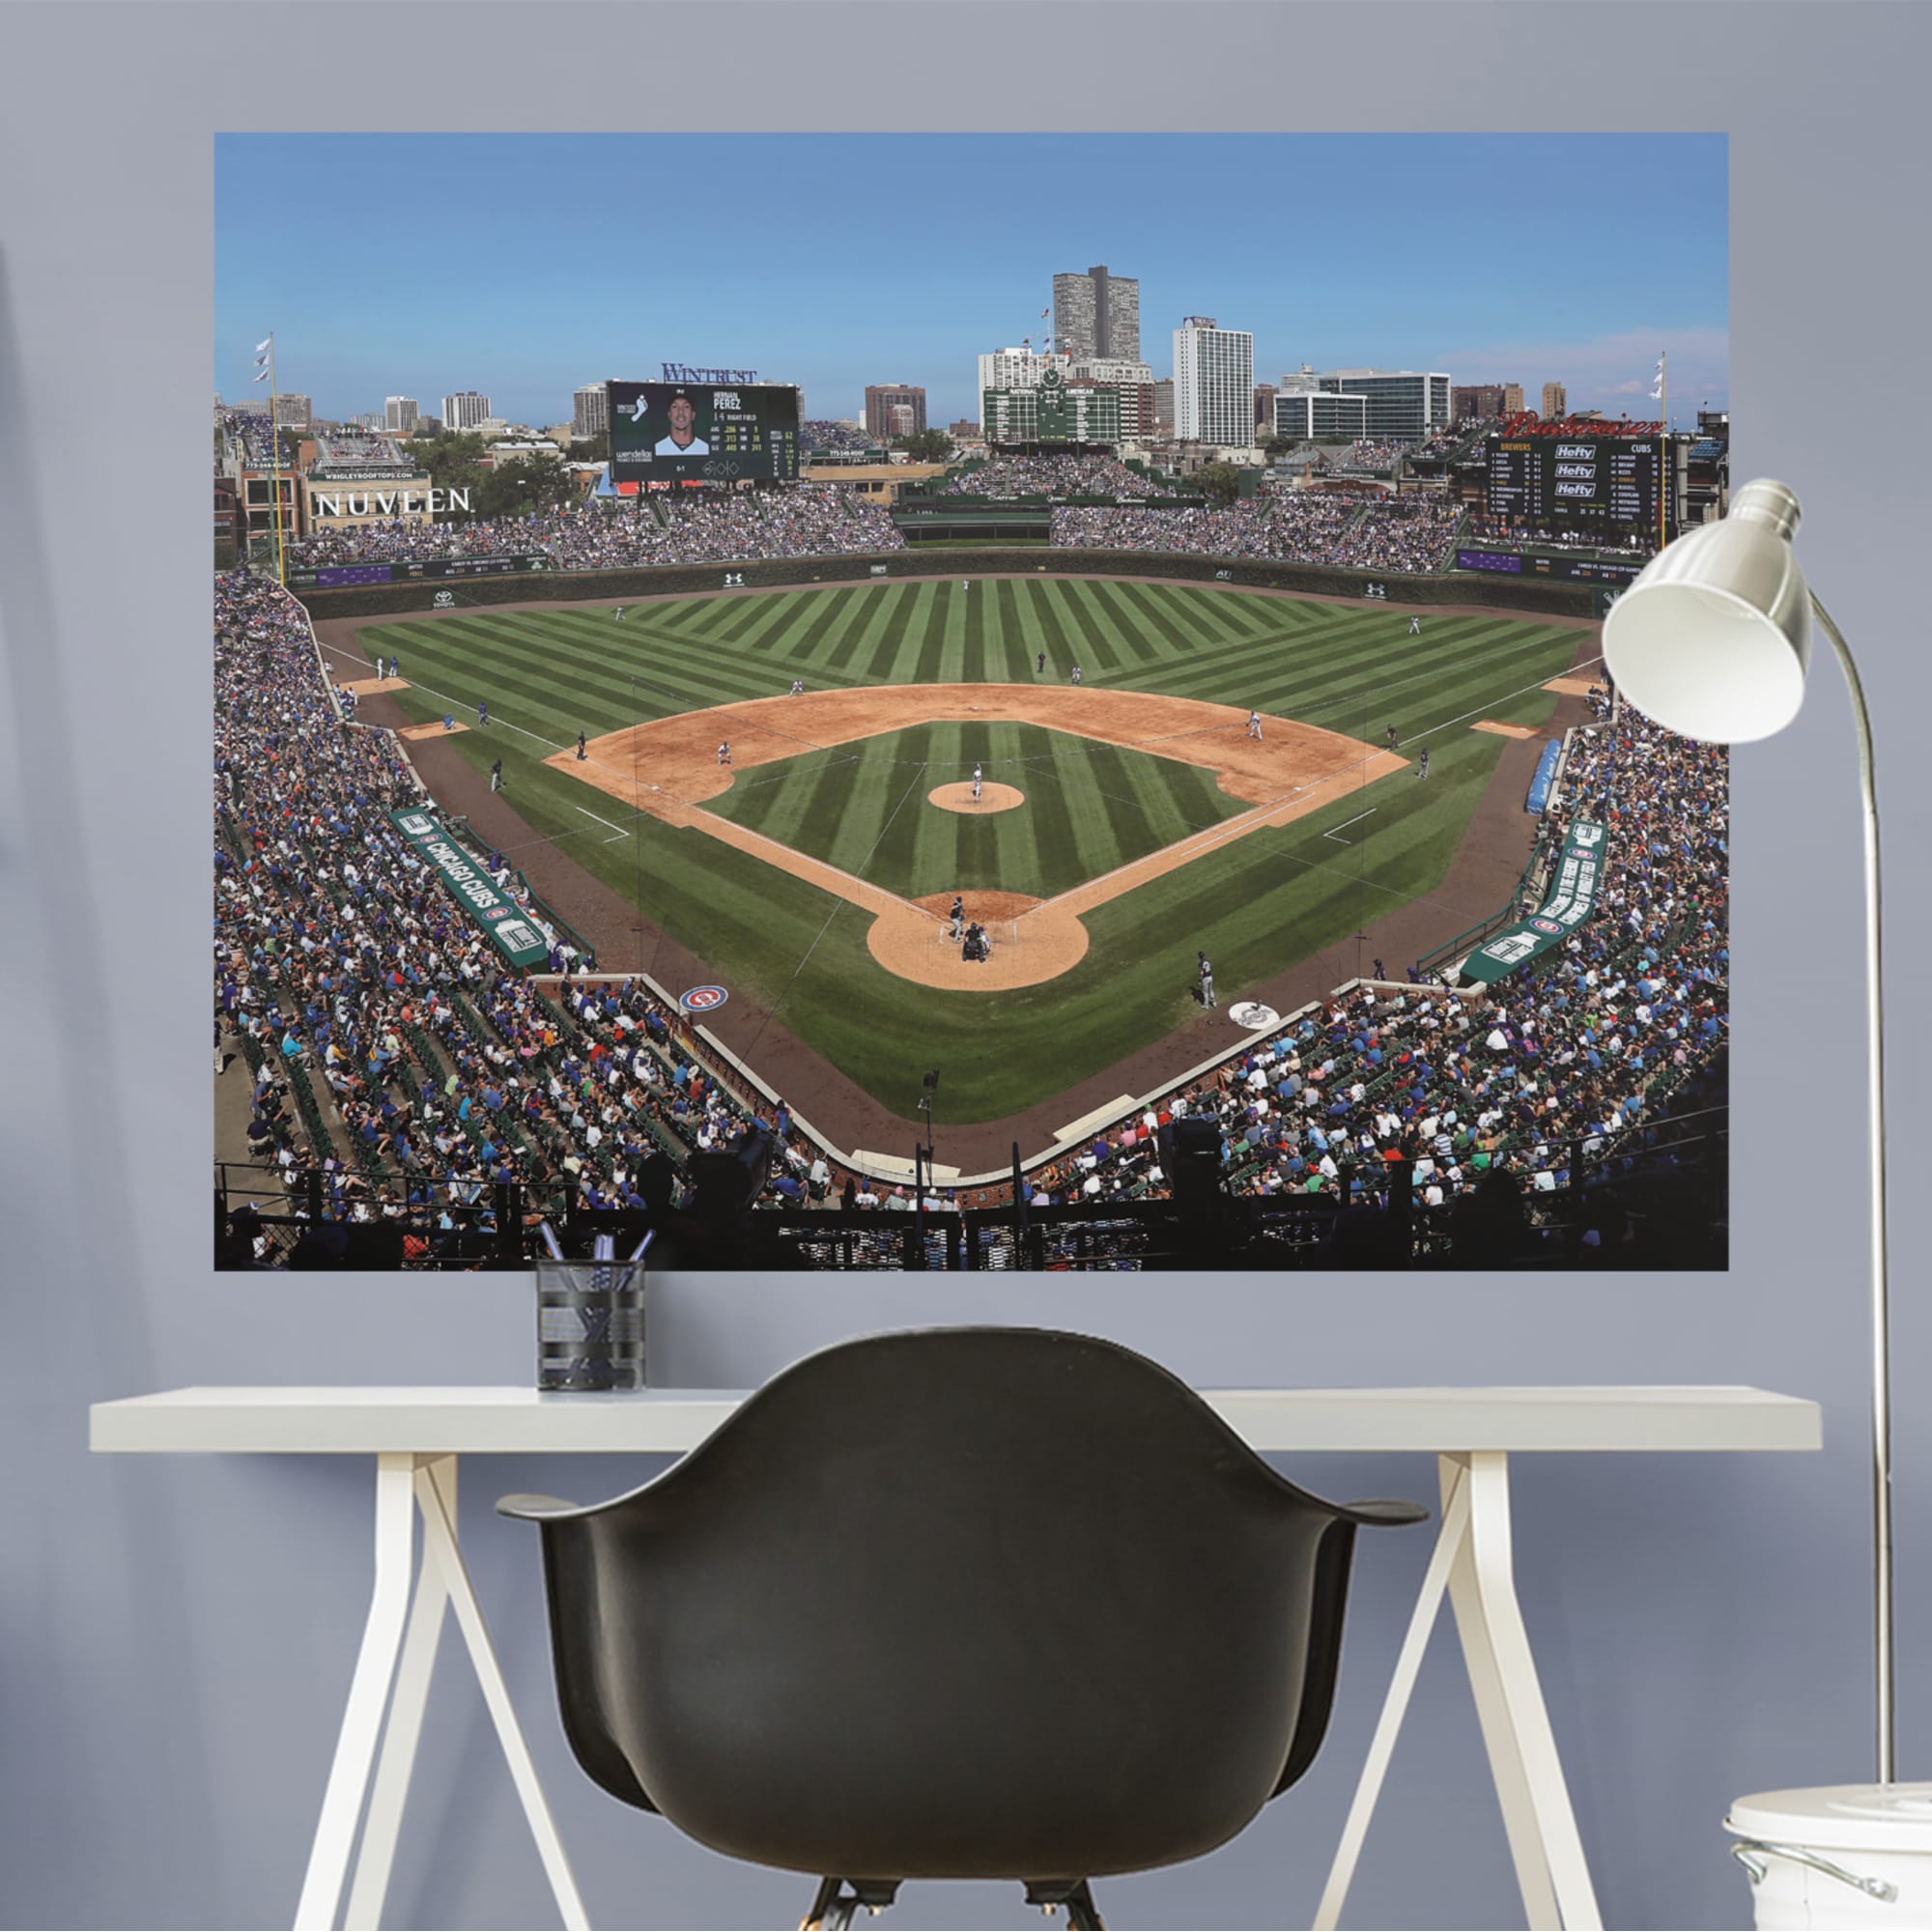 Fathead Chicago White Sox Giant Removable Wall Mural